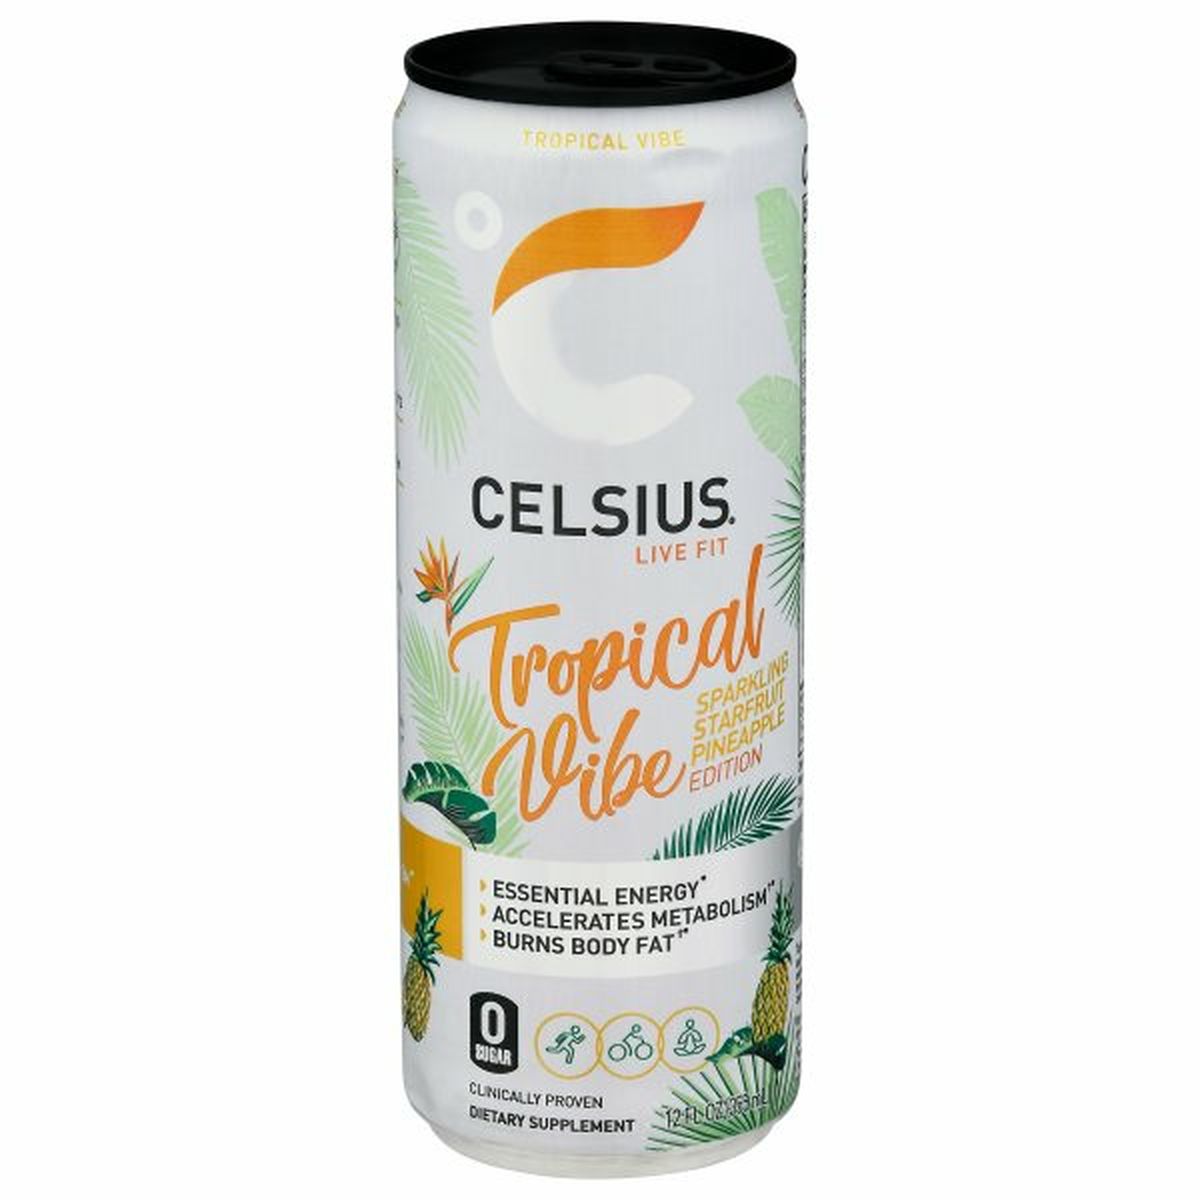 Calories in CELSIUS Tropical Vibe Energy Drink, Starfruit Pineapple Edition, Sparkling